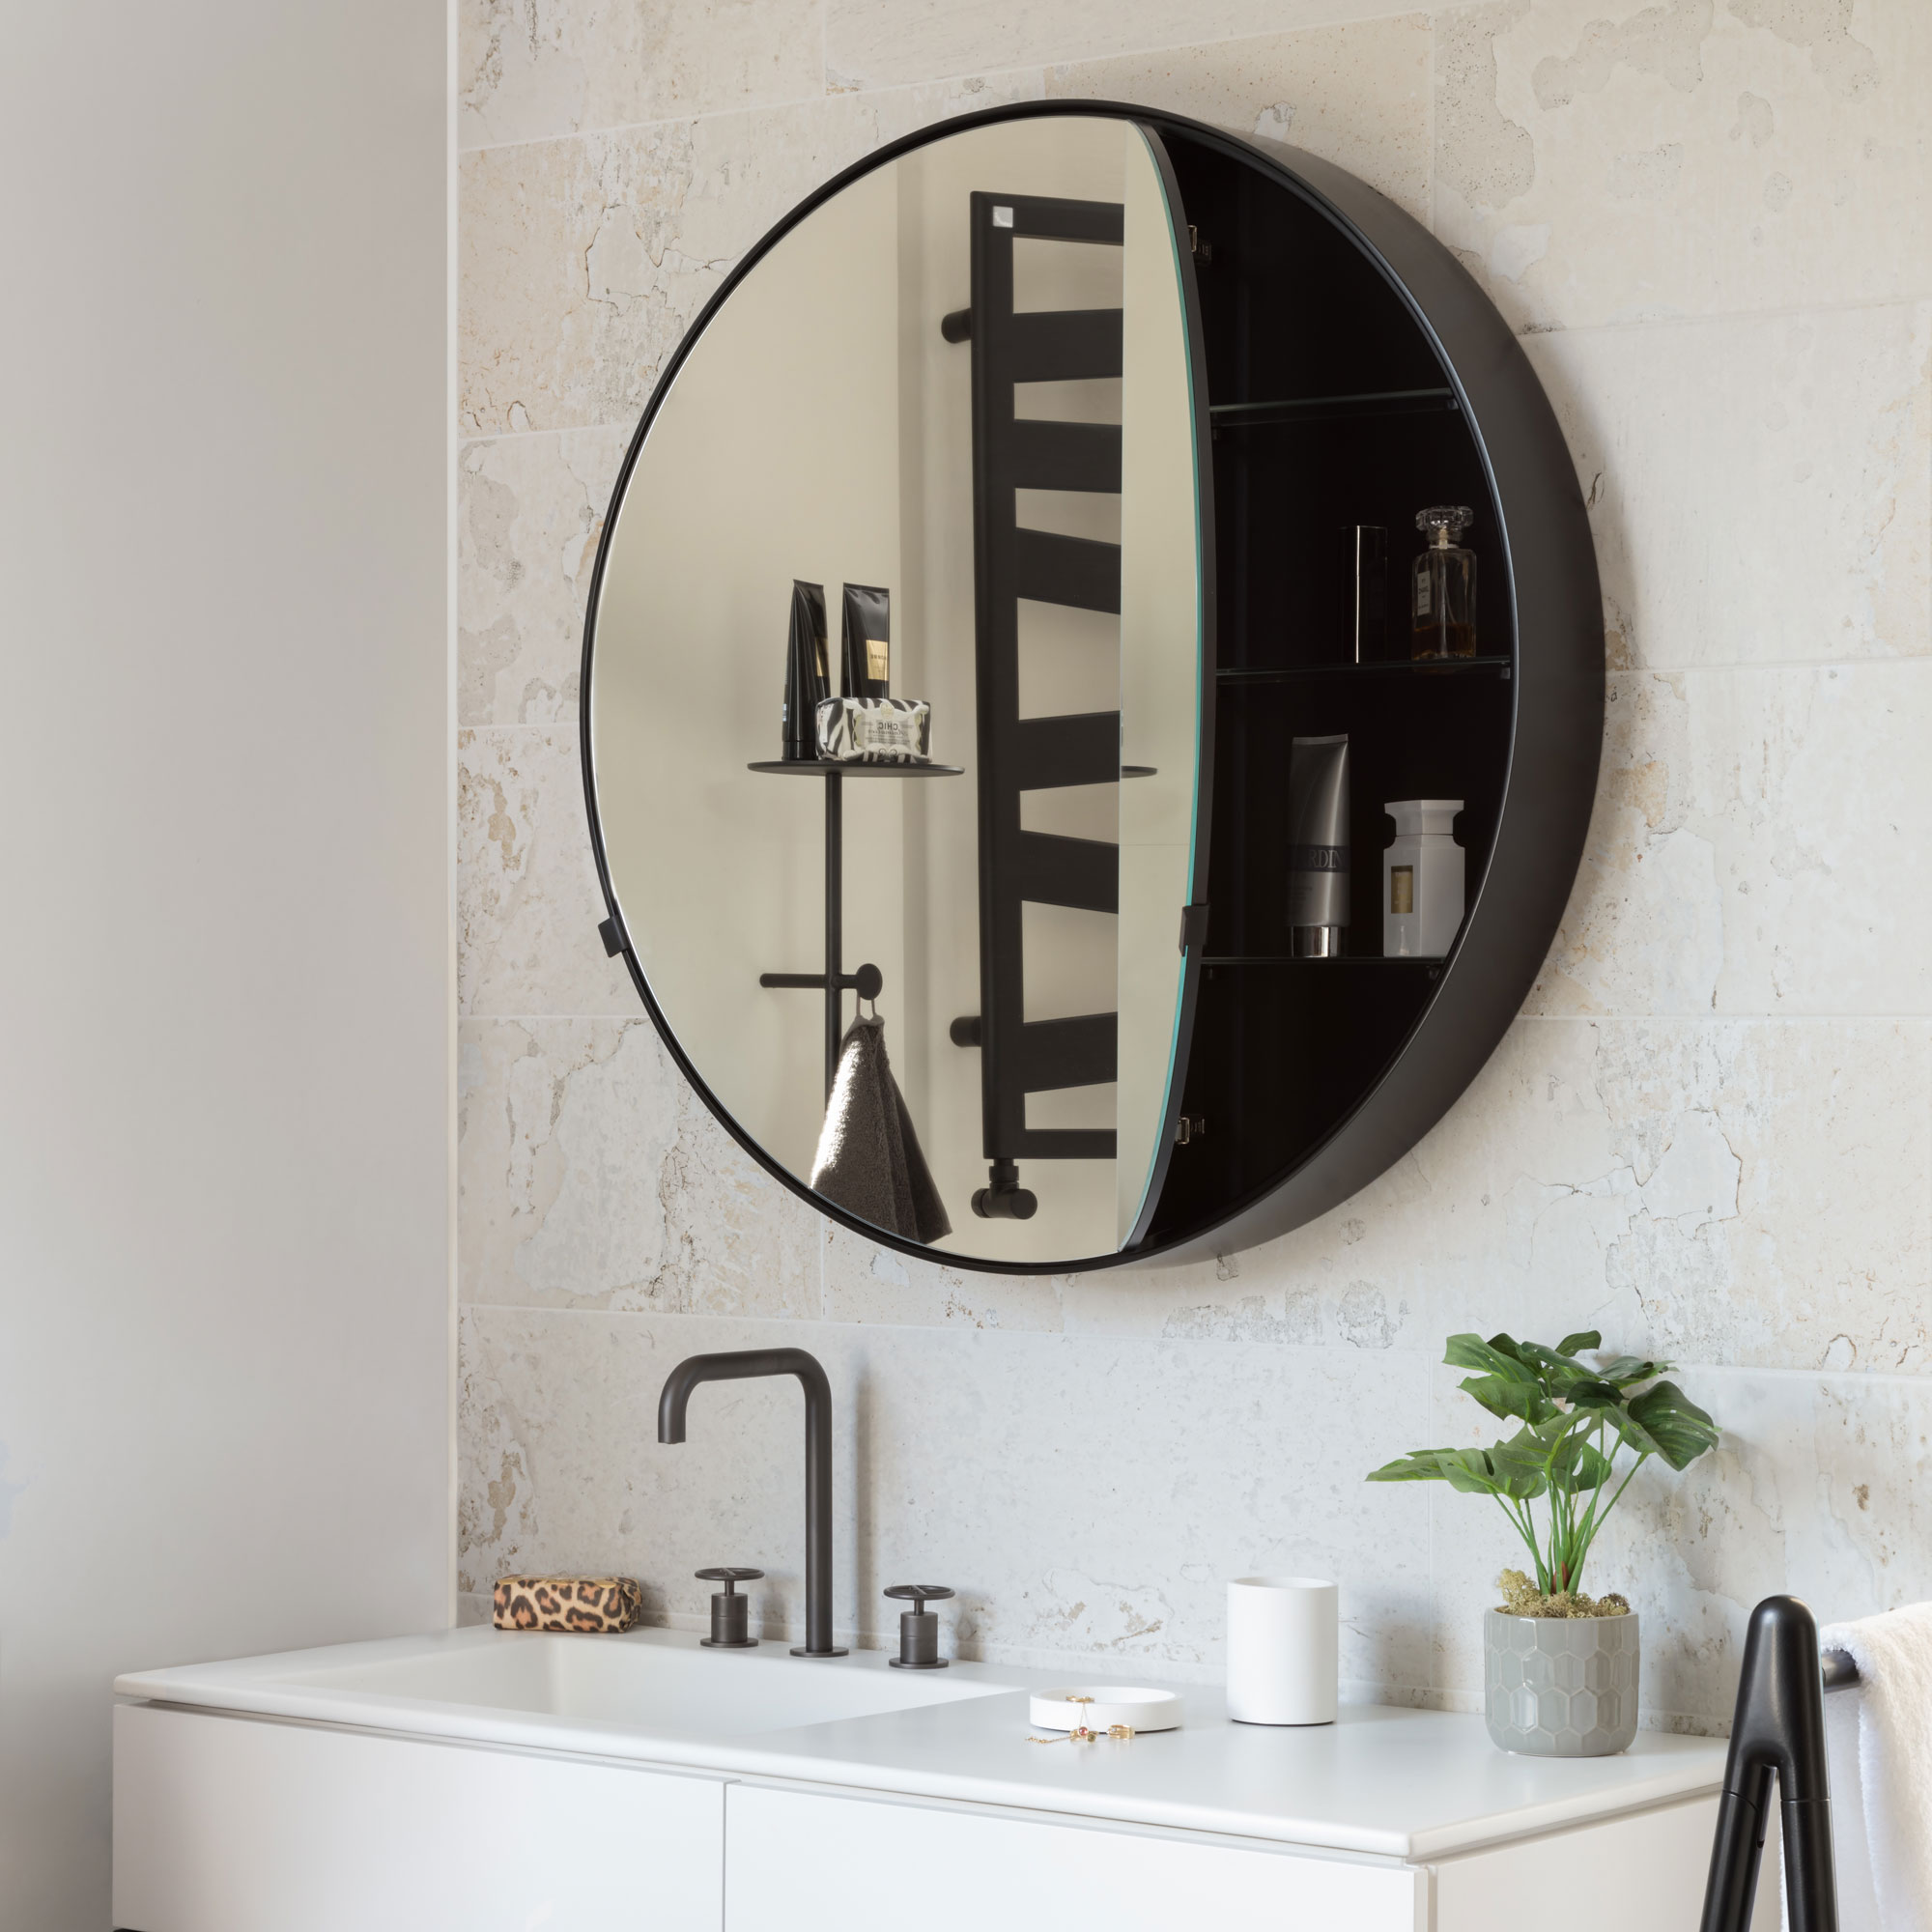 I Catini Round Box Mirrors And Cabinets, Round Bathroom Mirror With Storage